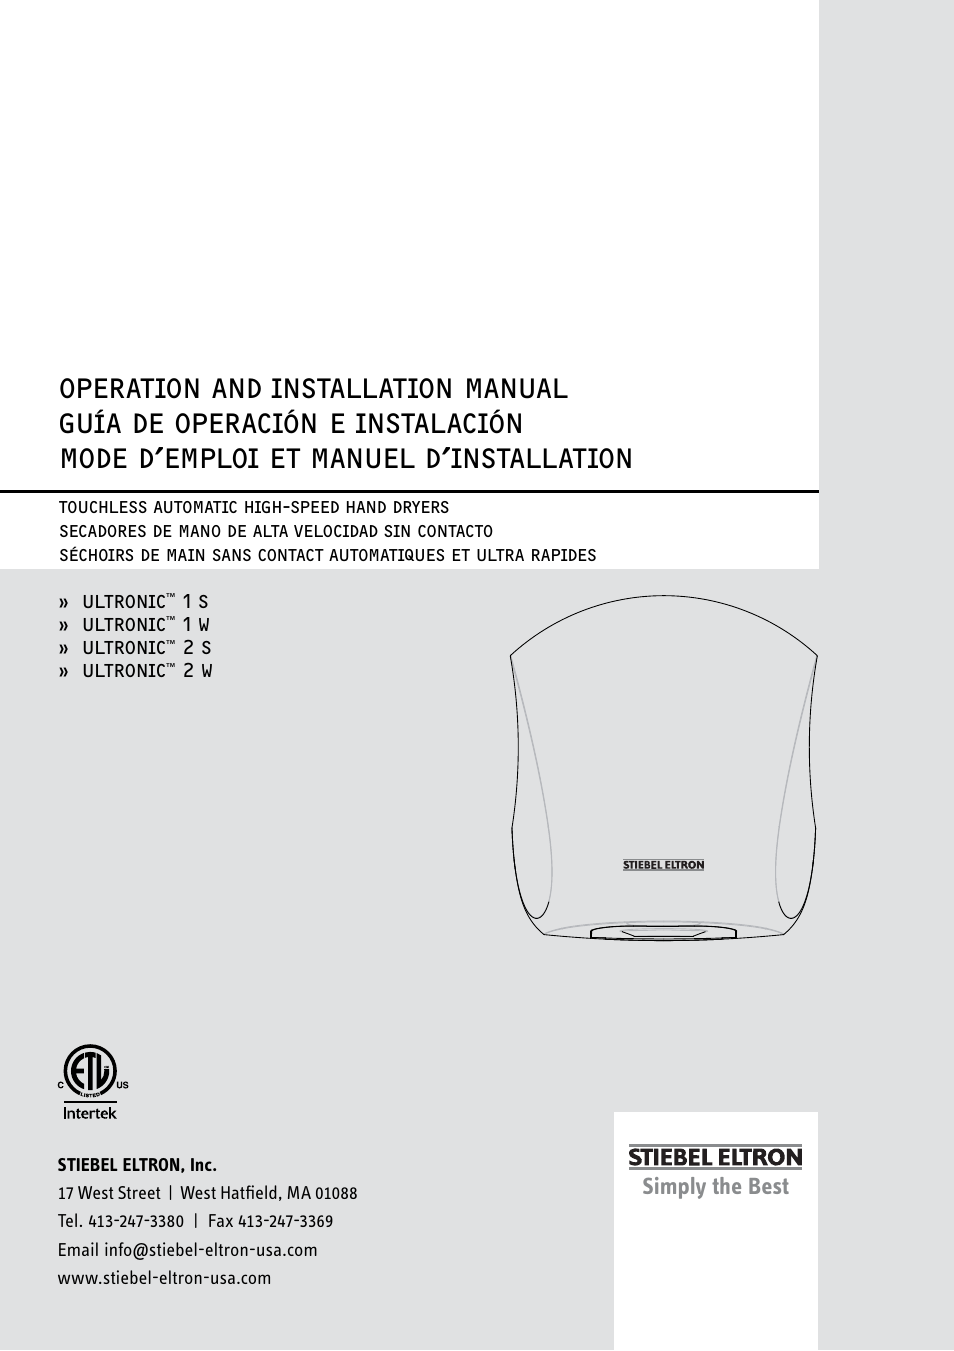 STIEBEL ELTRON ULTRONIC 2 W User Manual | 31 pages